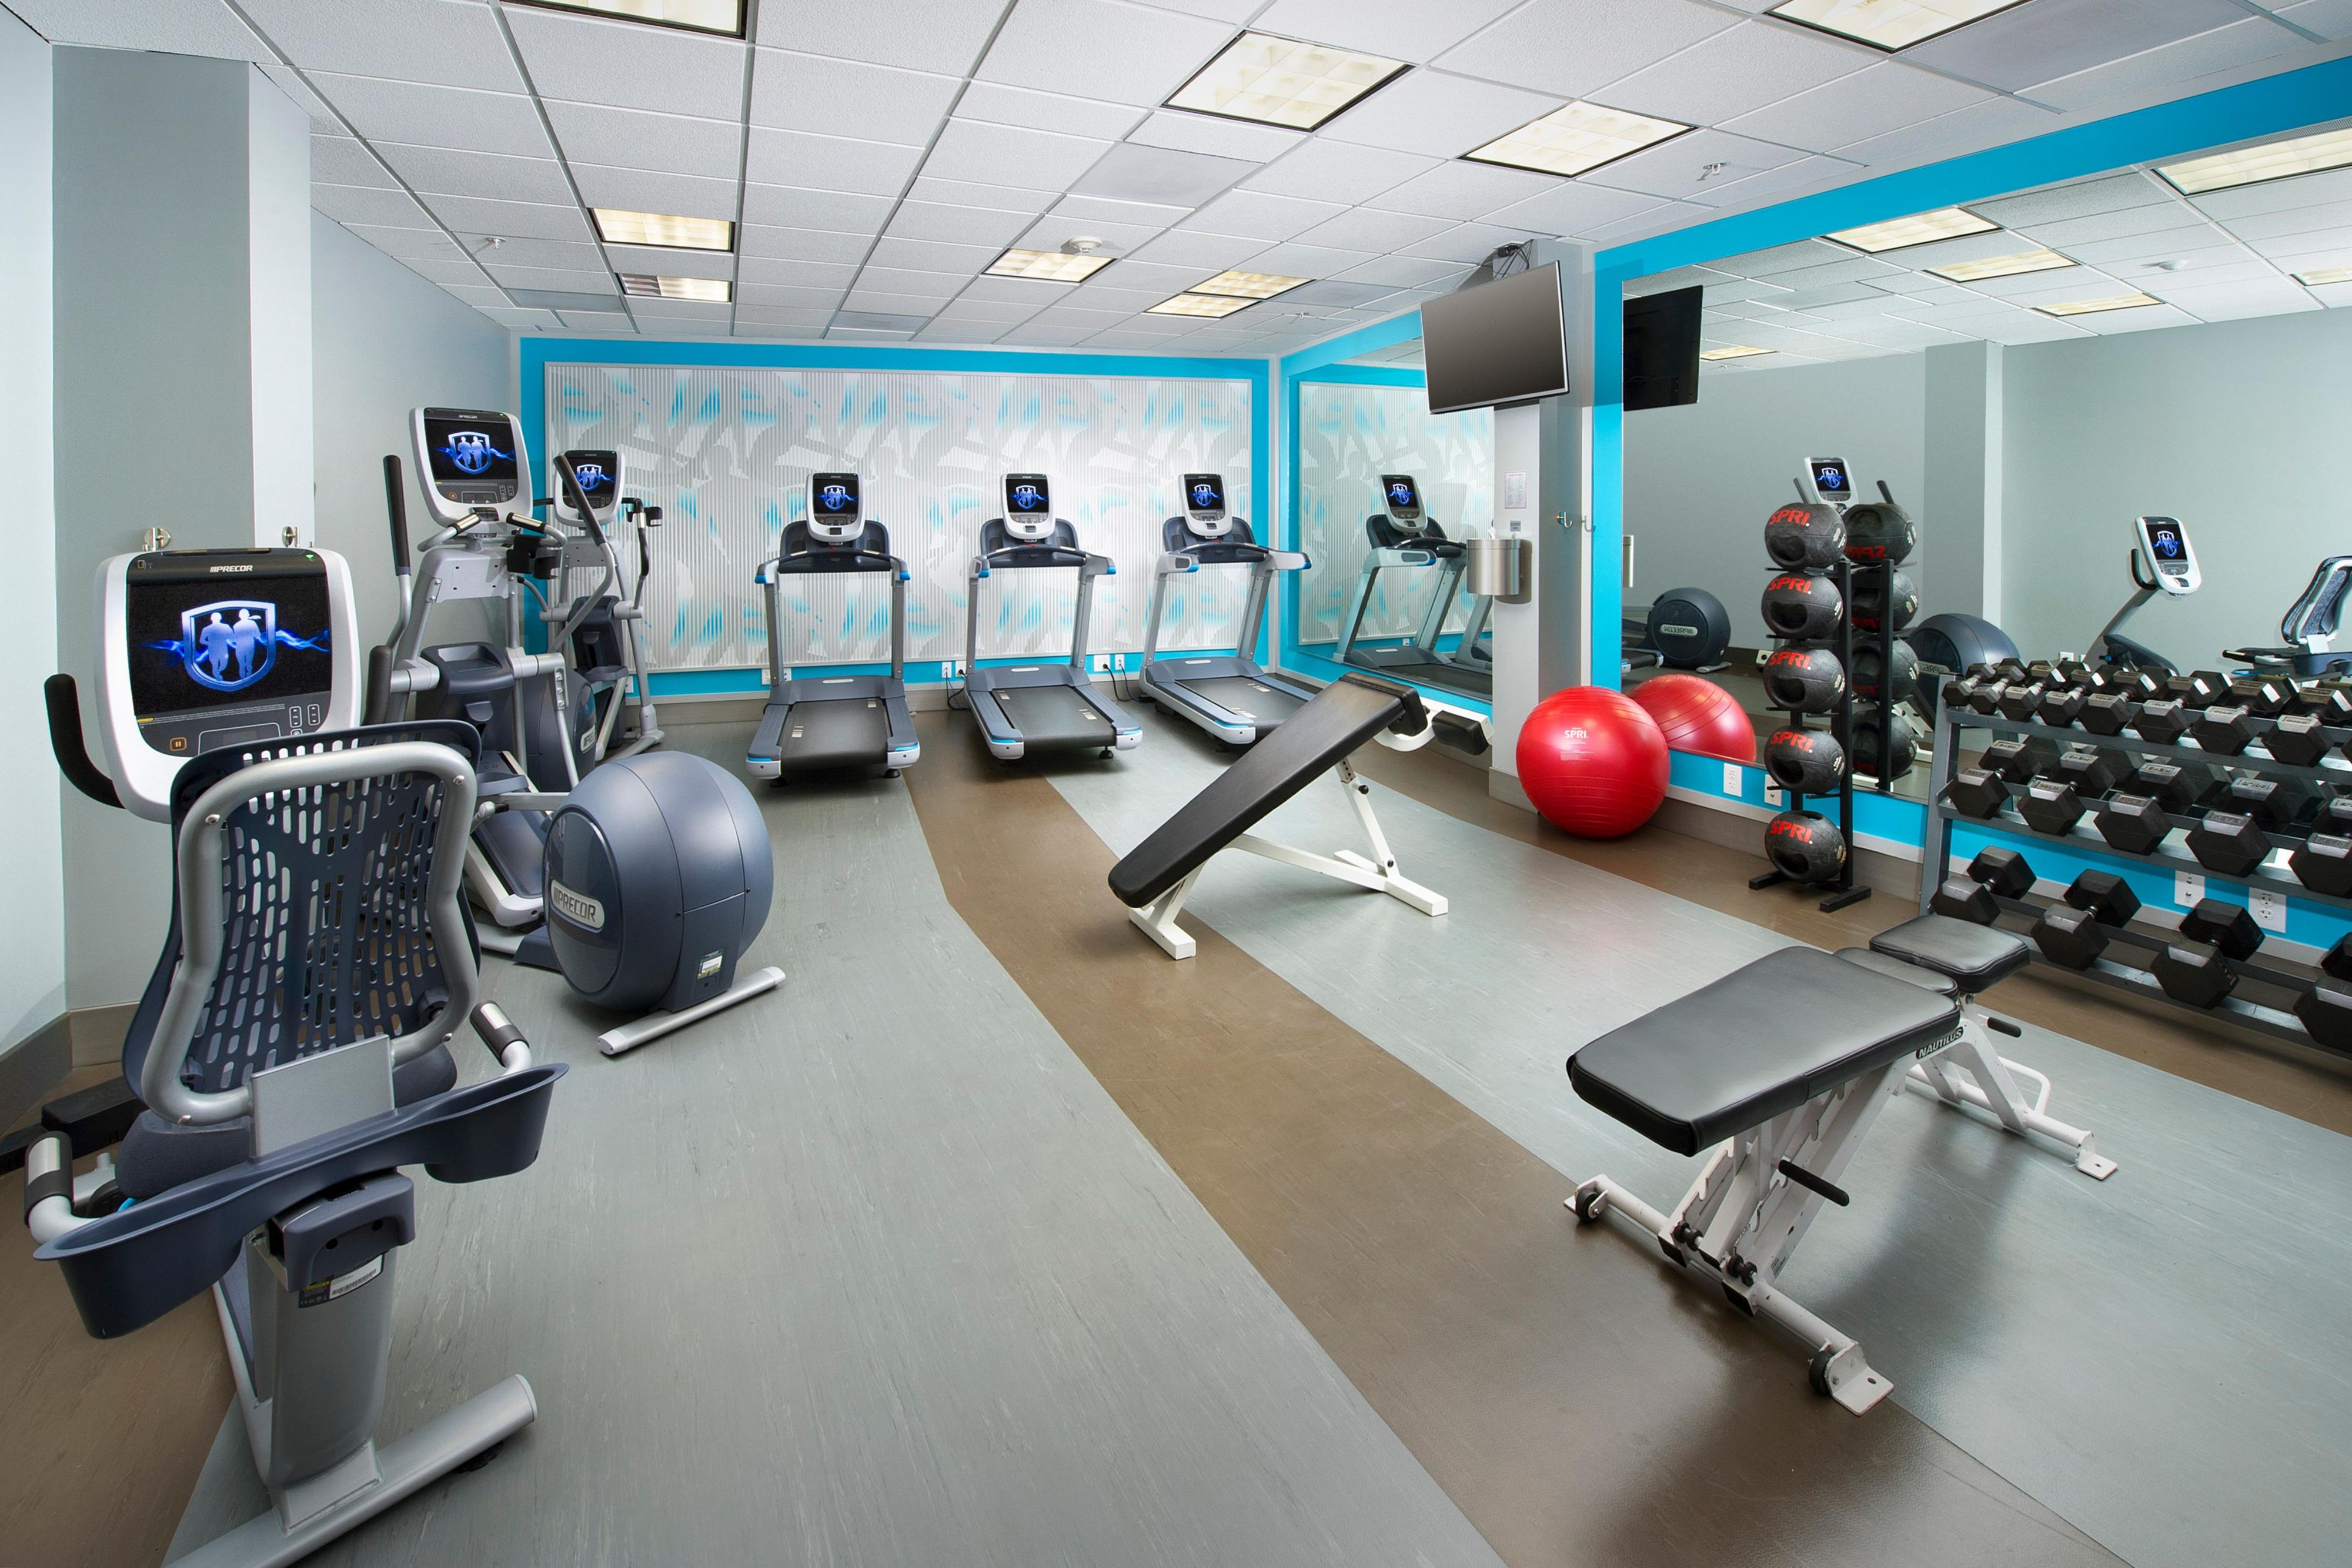 Browse social media from our brand new high-tech fitness center.